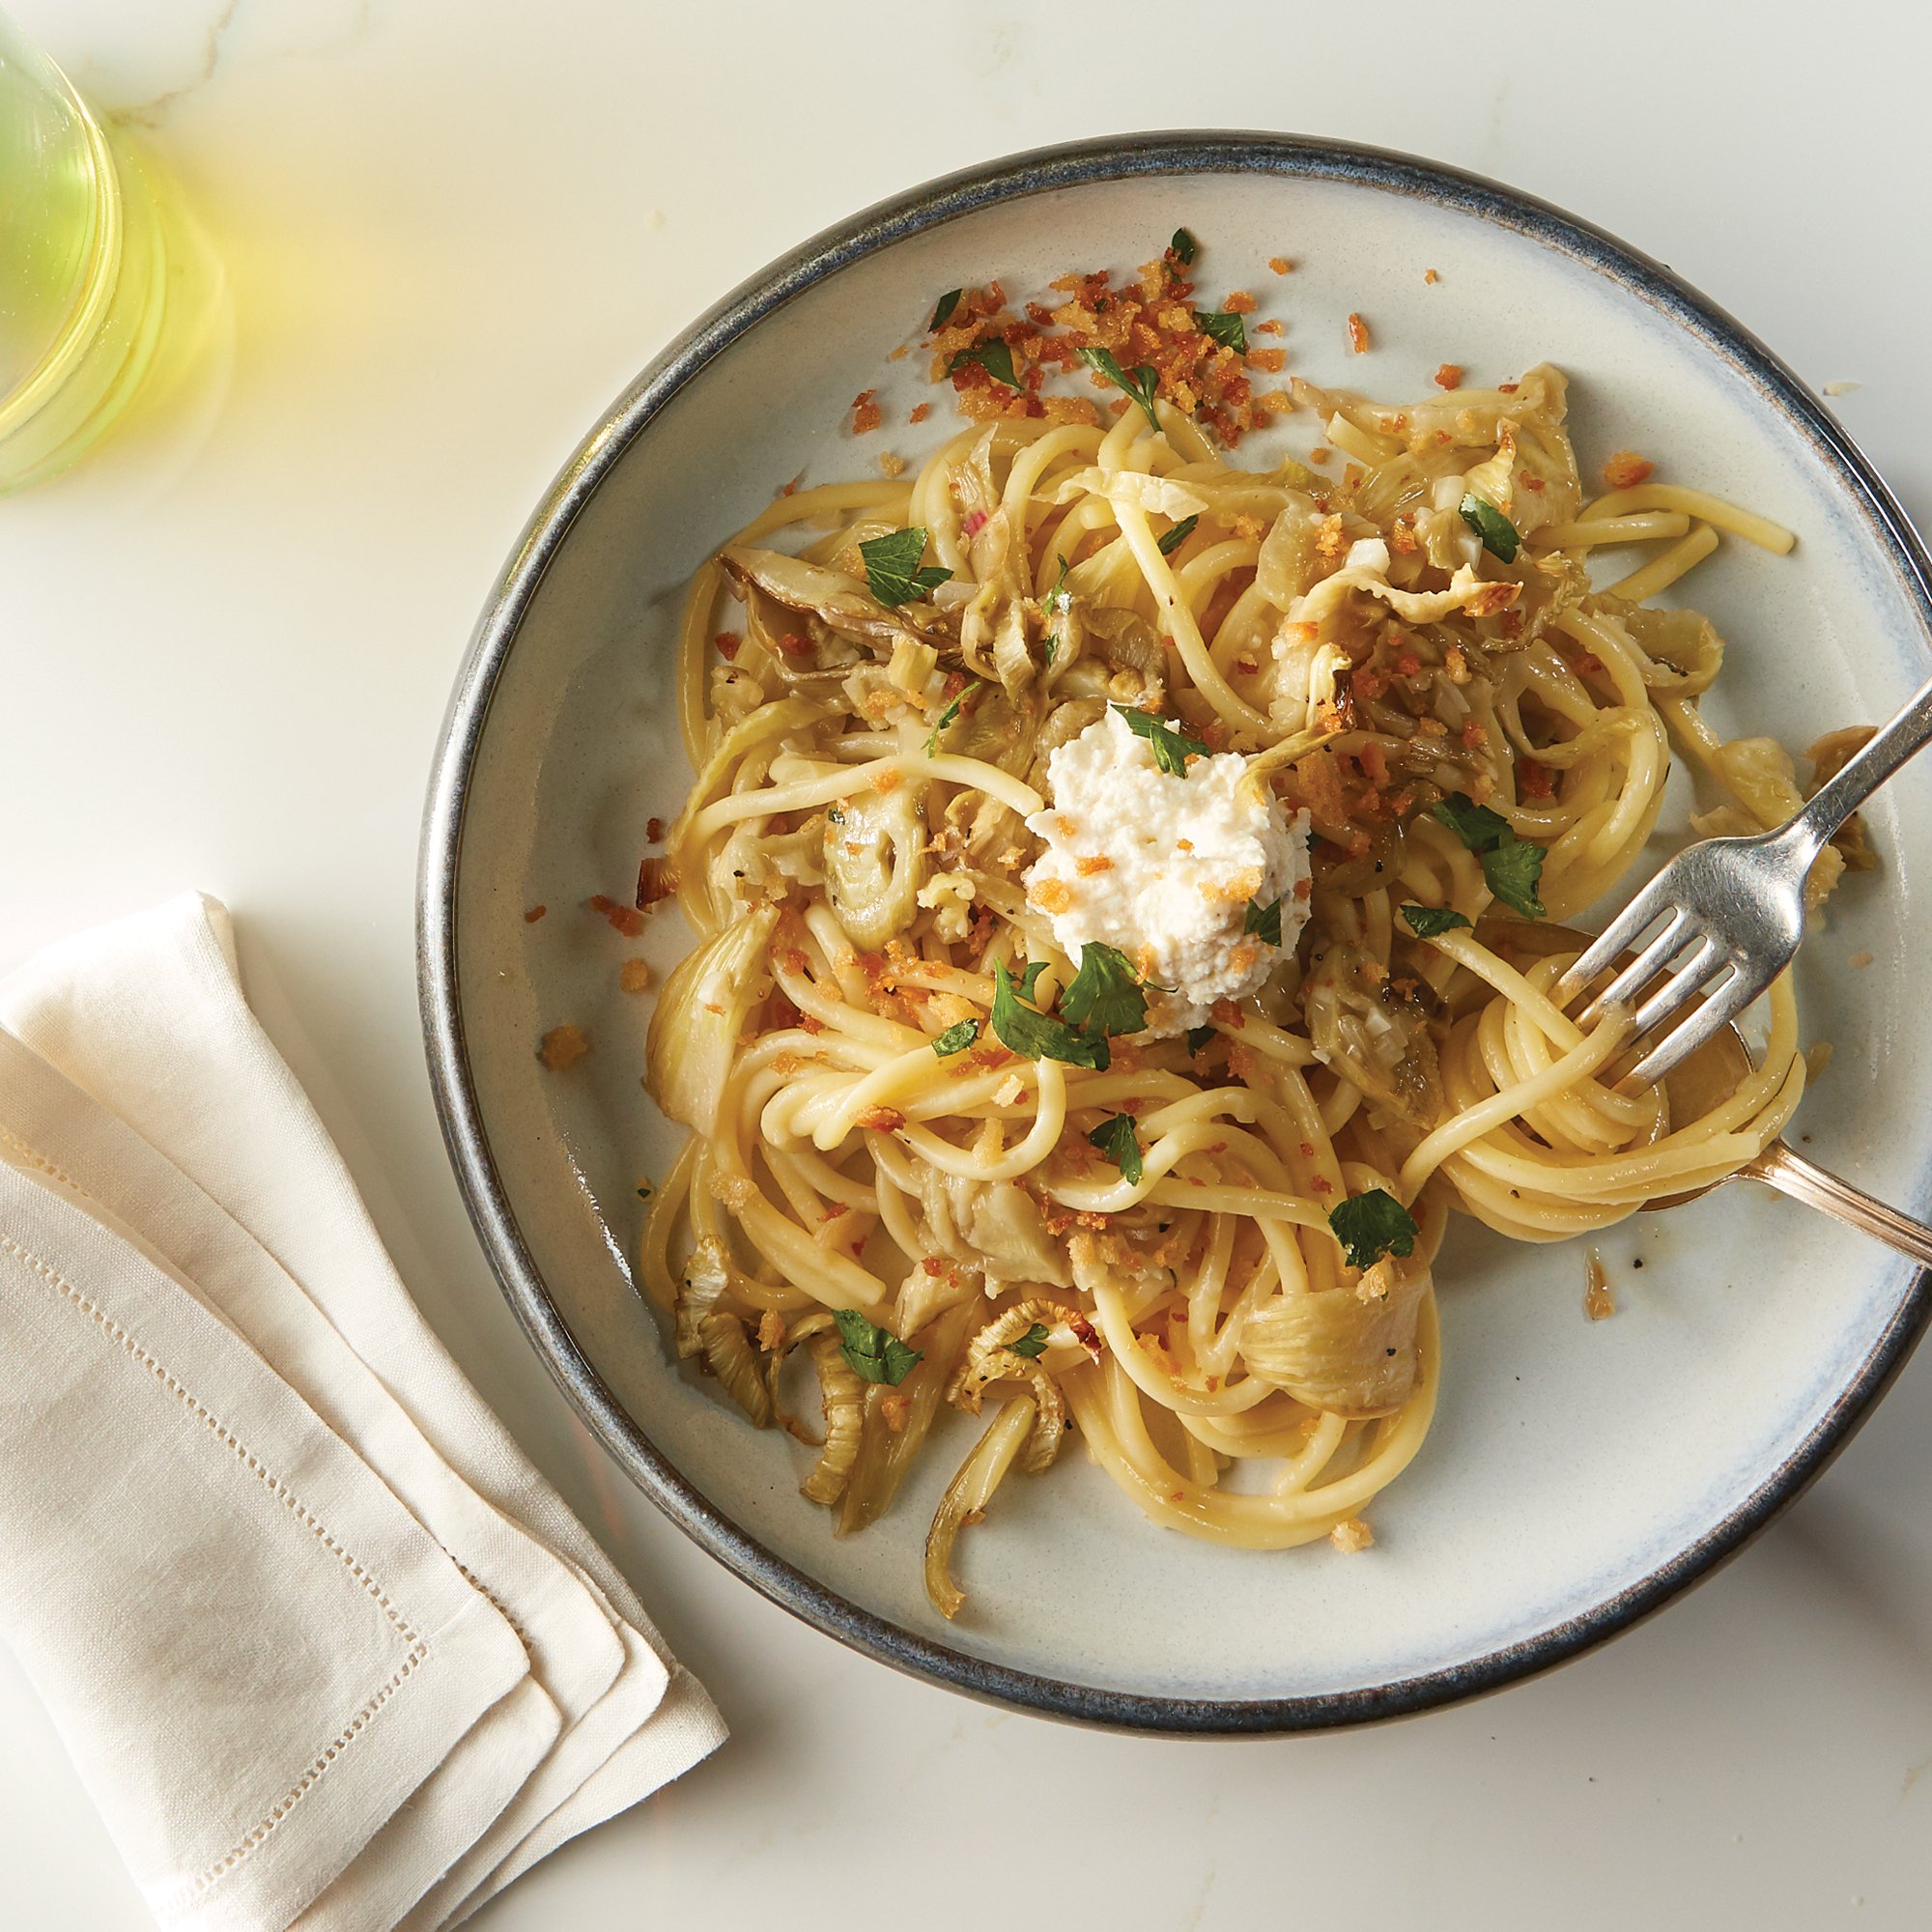 https://images.heb.com/is/image/HEBGrocery/Test/roasted-fennel-and-ricotta-spaghetti-alla-chitarra-recipe.jpg